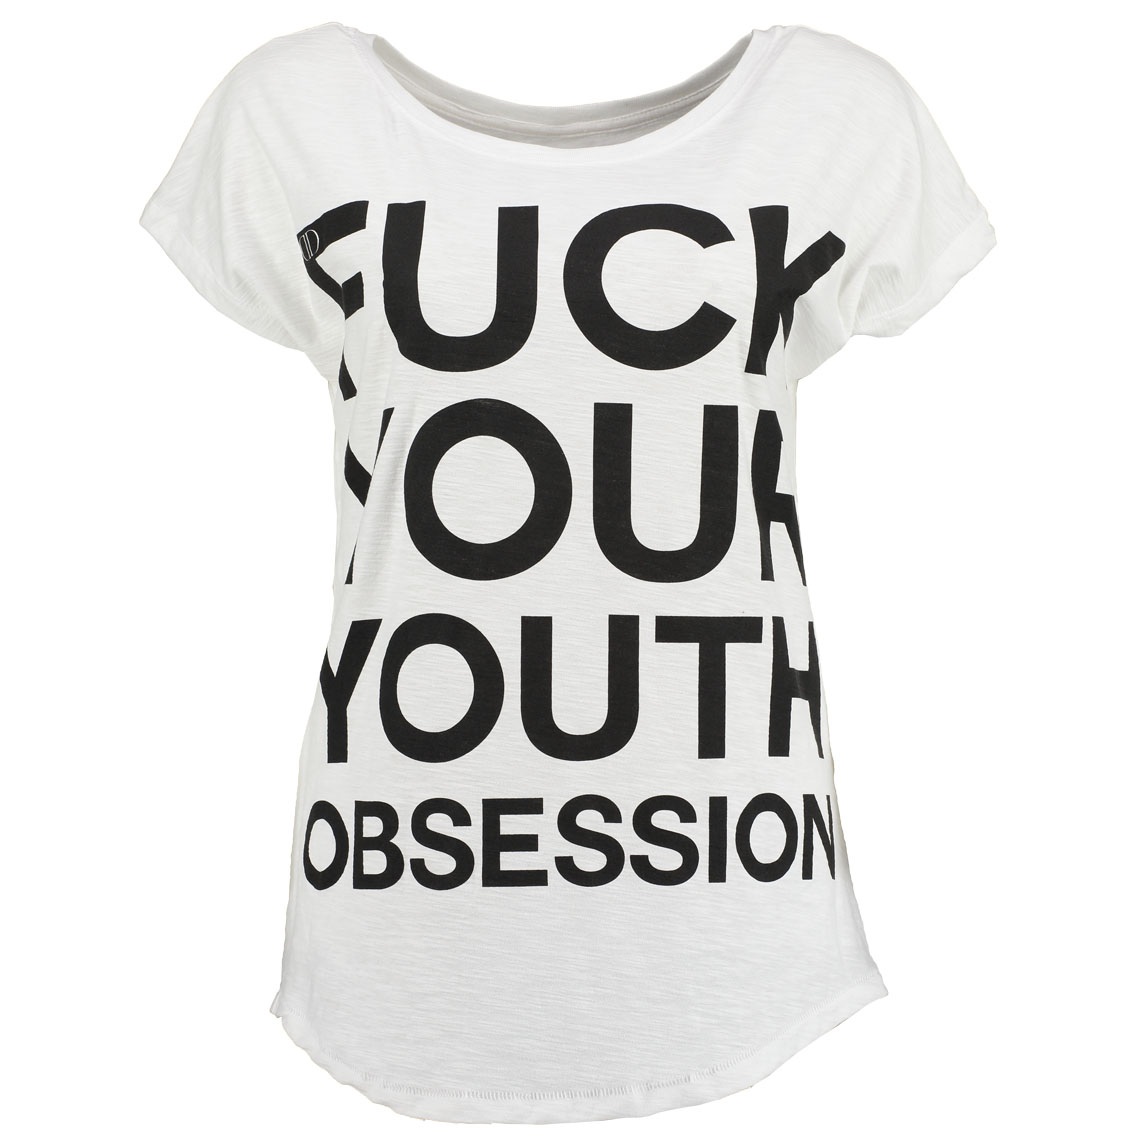 Deportment Department ladies Fuck your youth obsession t shirt white